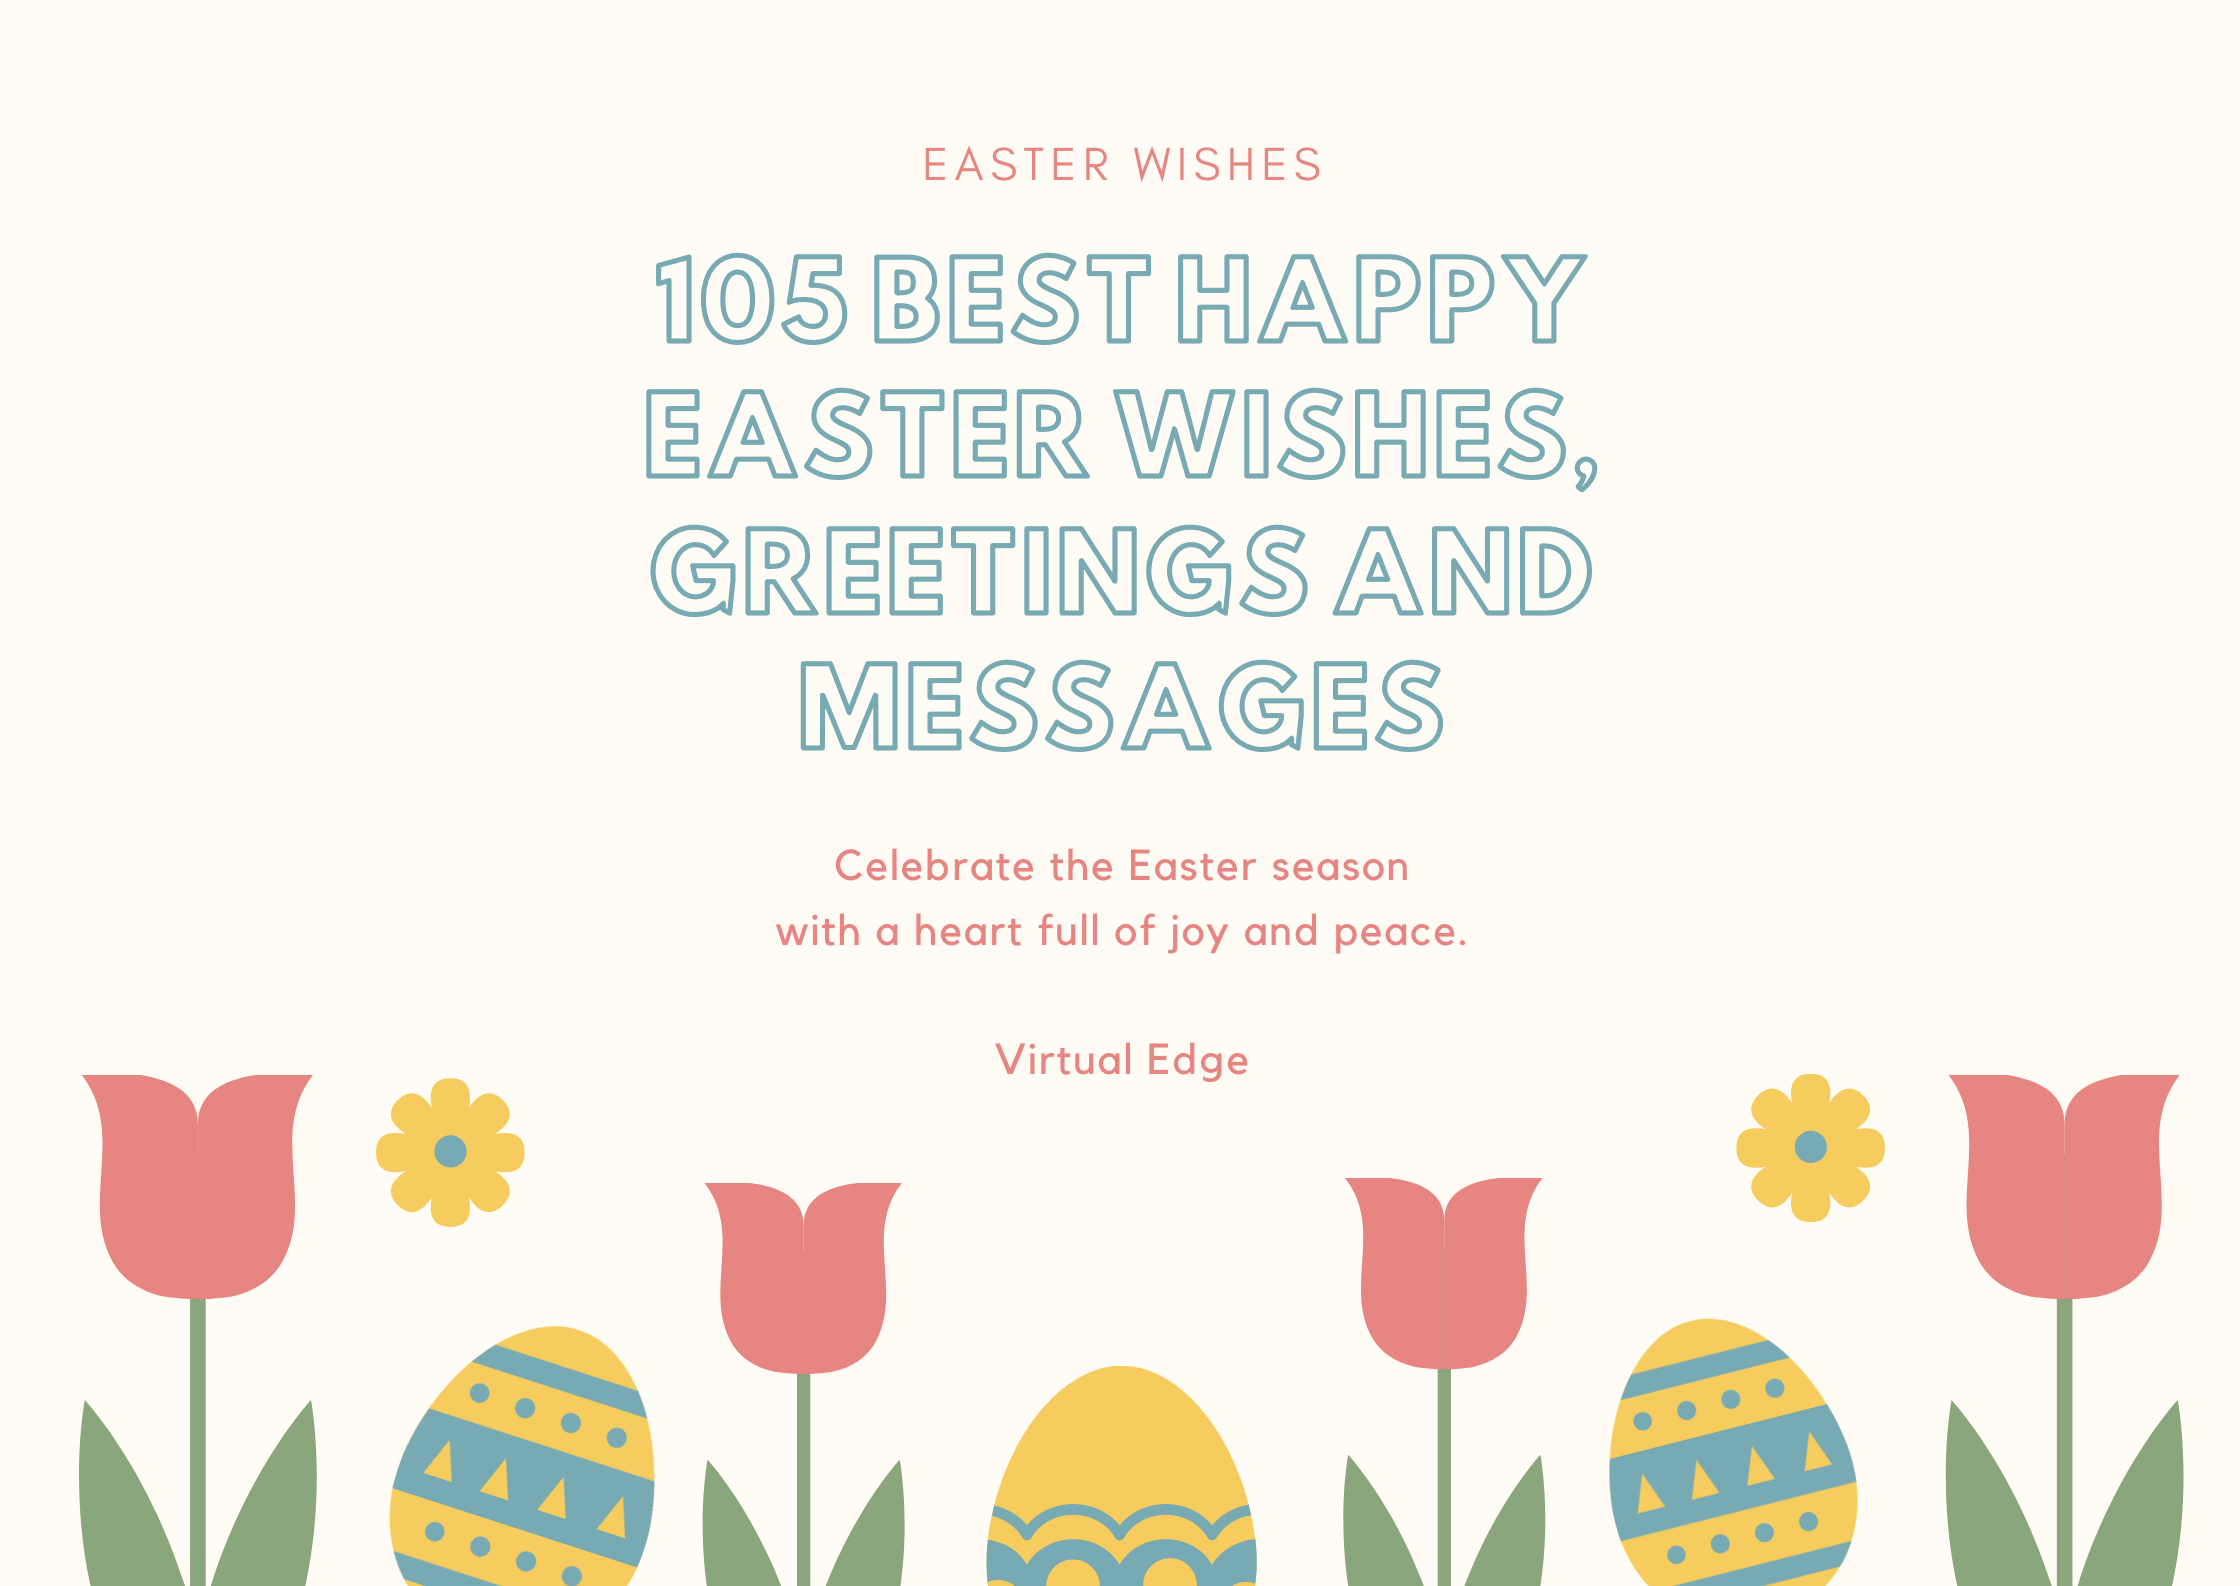 110 Best Happy Easter Wishes, Greetings and Messages Virtual Edge